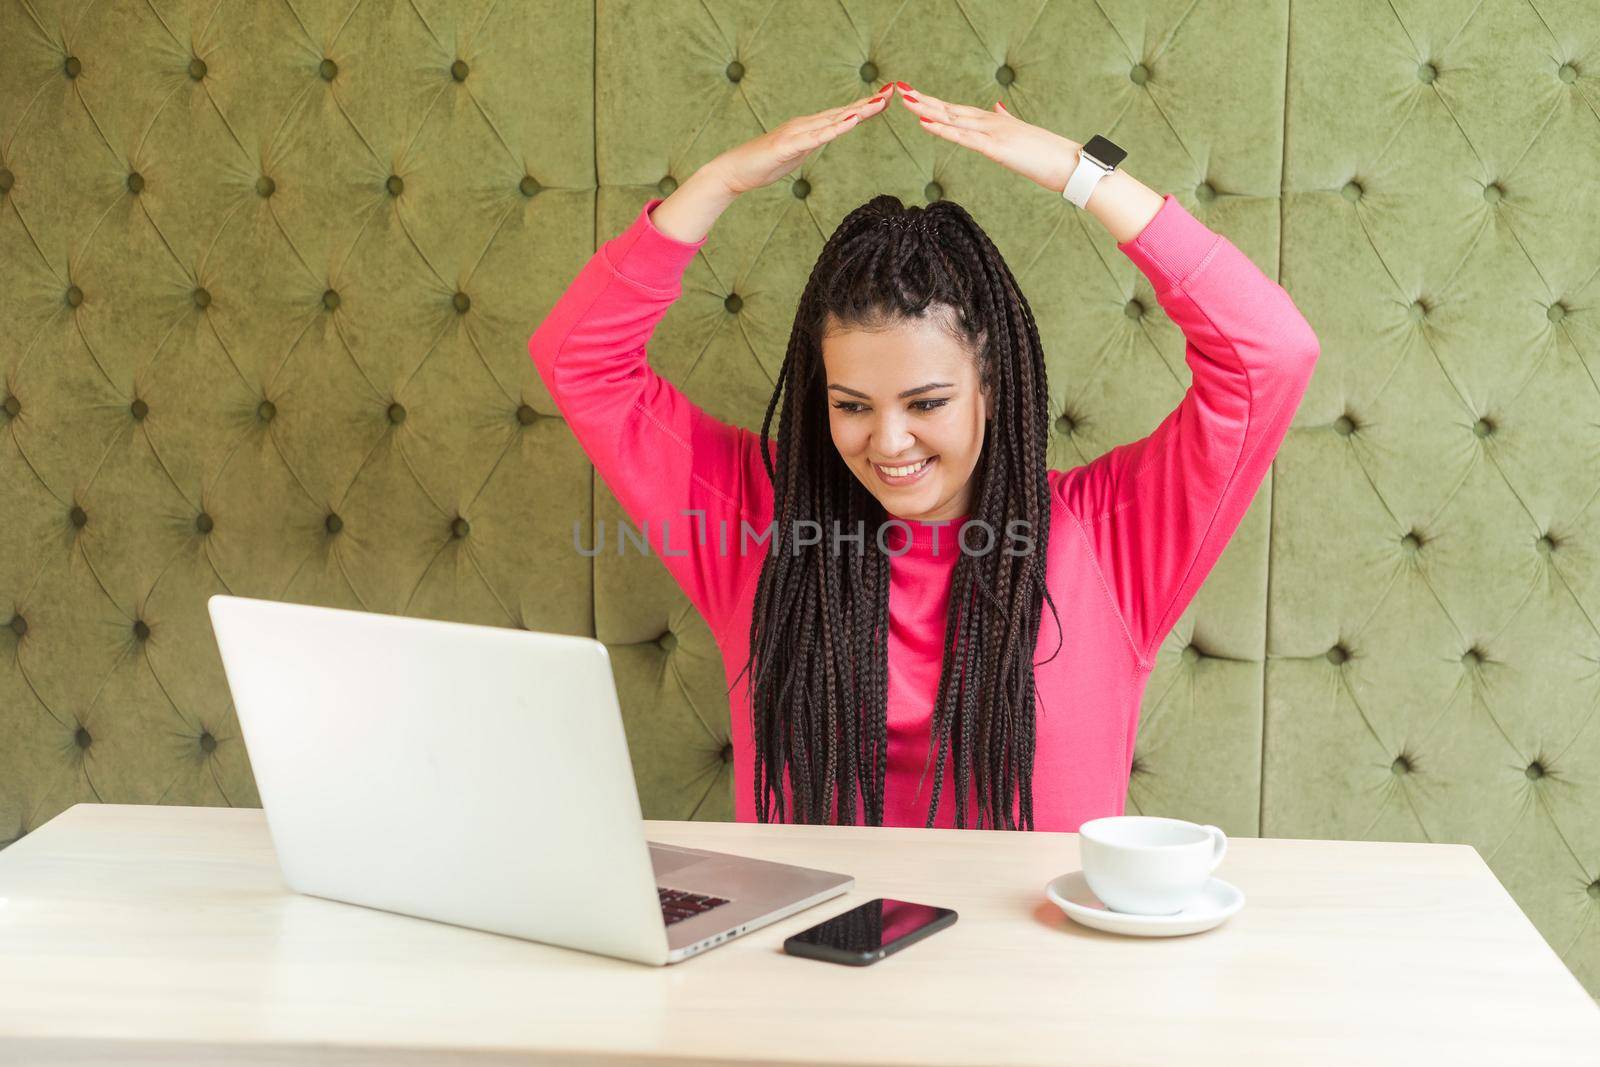 I'm in safety. Portrait of childish young girl with black dreadlocks hairstyle in pink blouse are sitting in office and holding hand upper hand, making roof with hands, looking at laptop, toothy smile